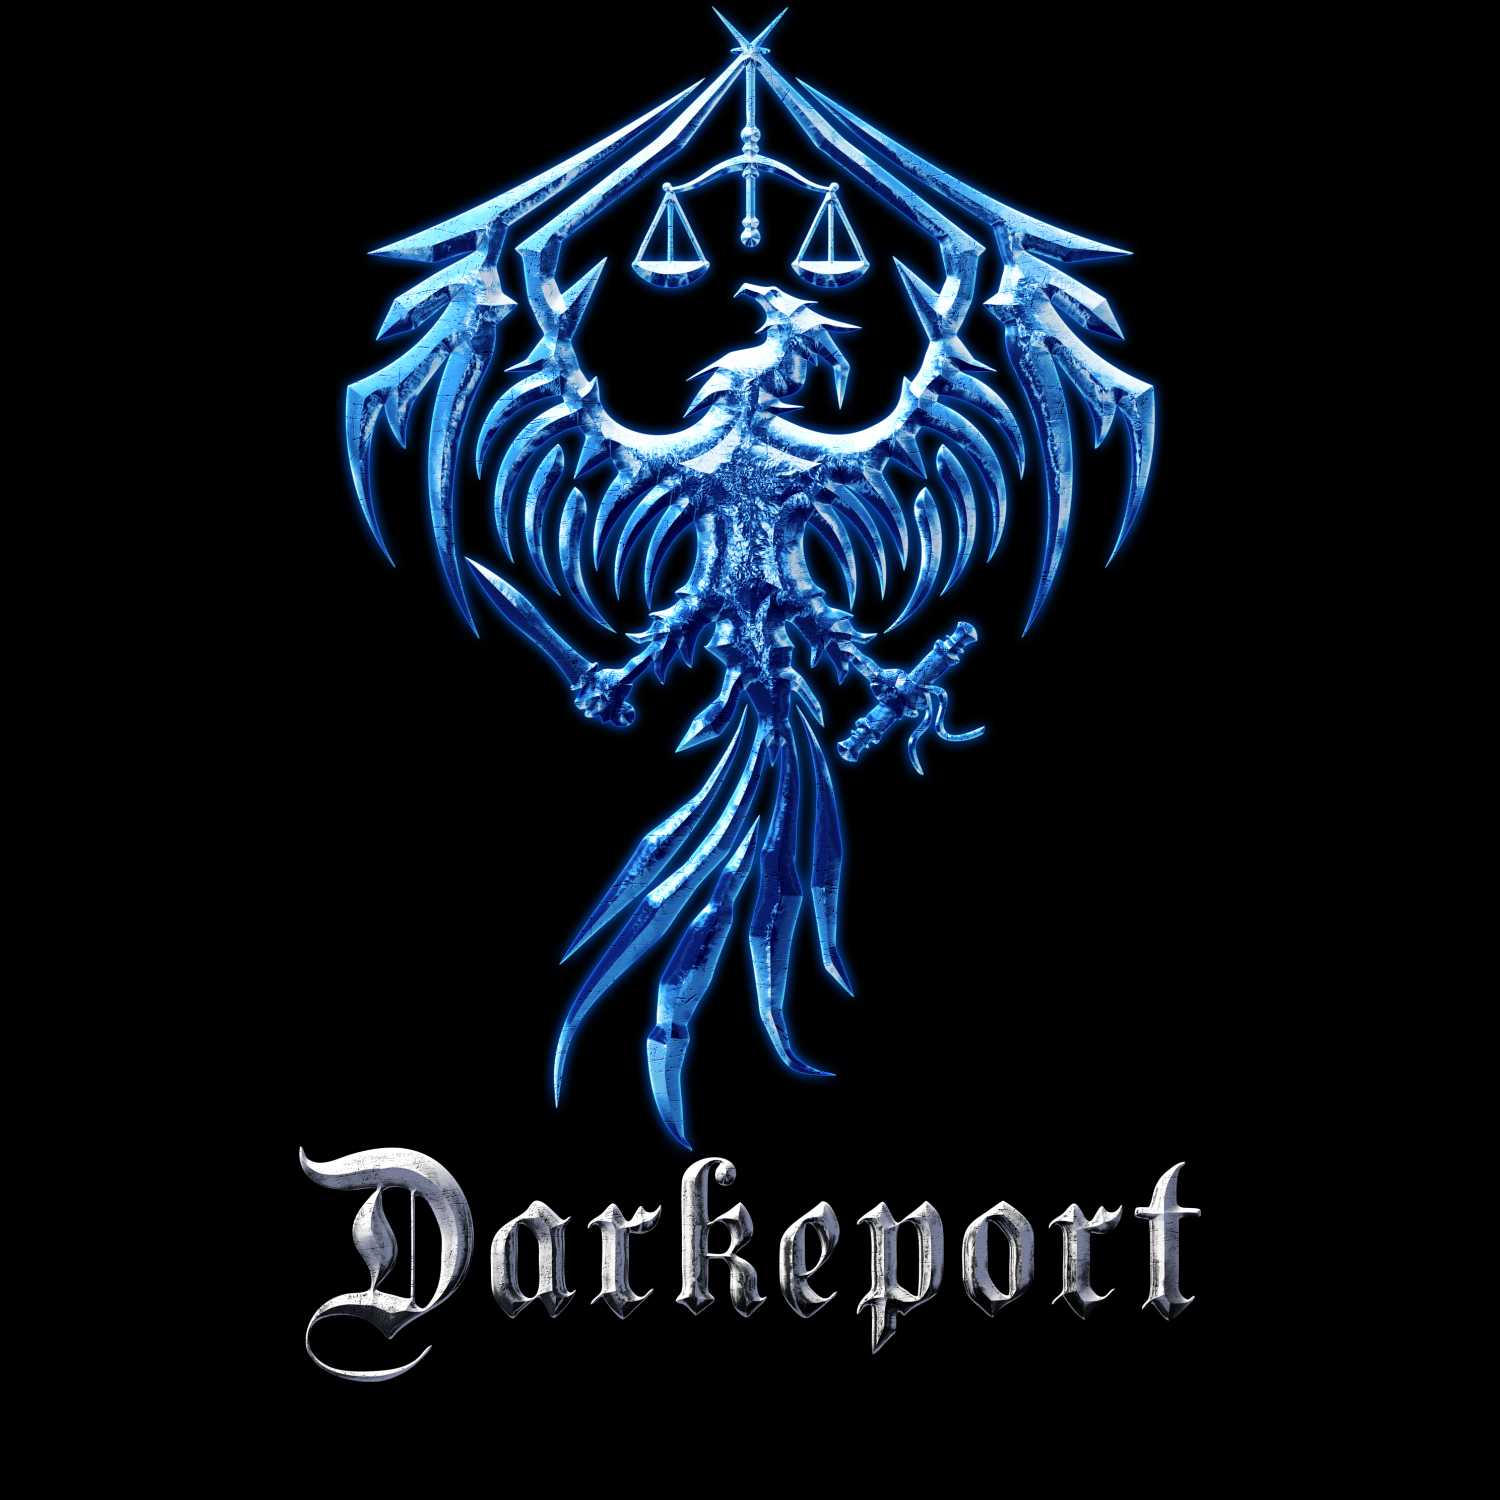 Darkeport – Campaign 1: Gold, Green, and Red